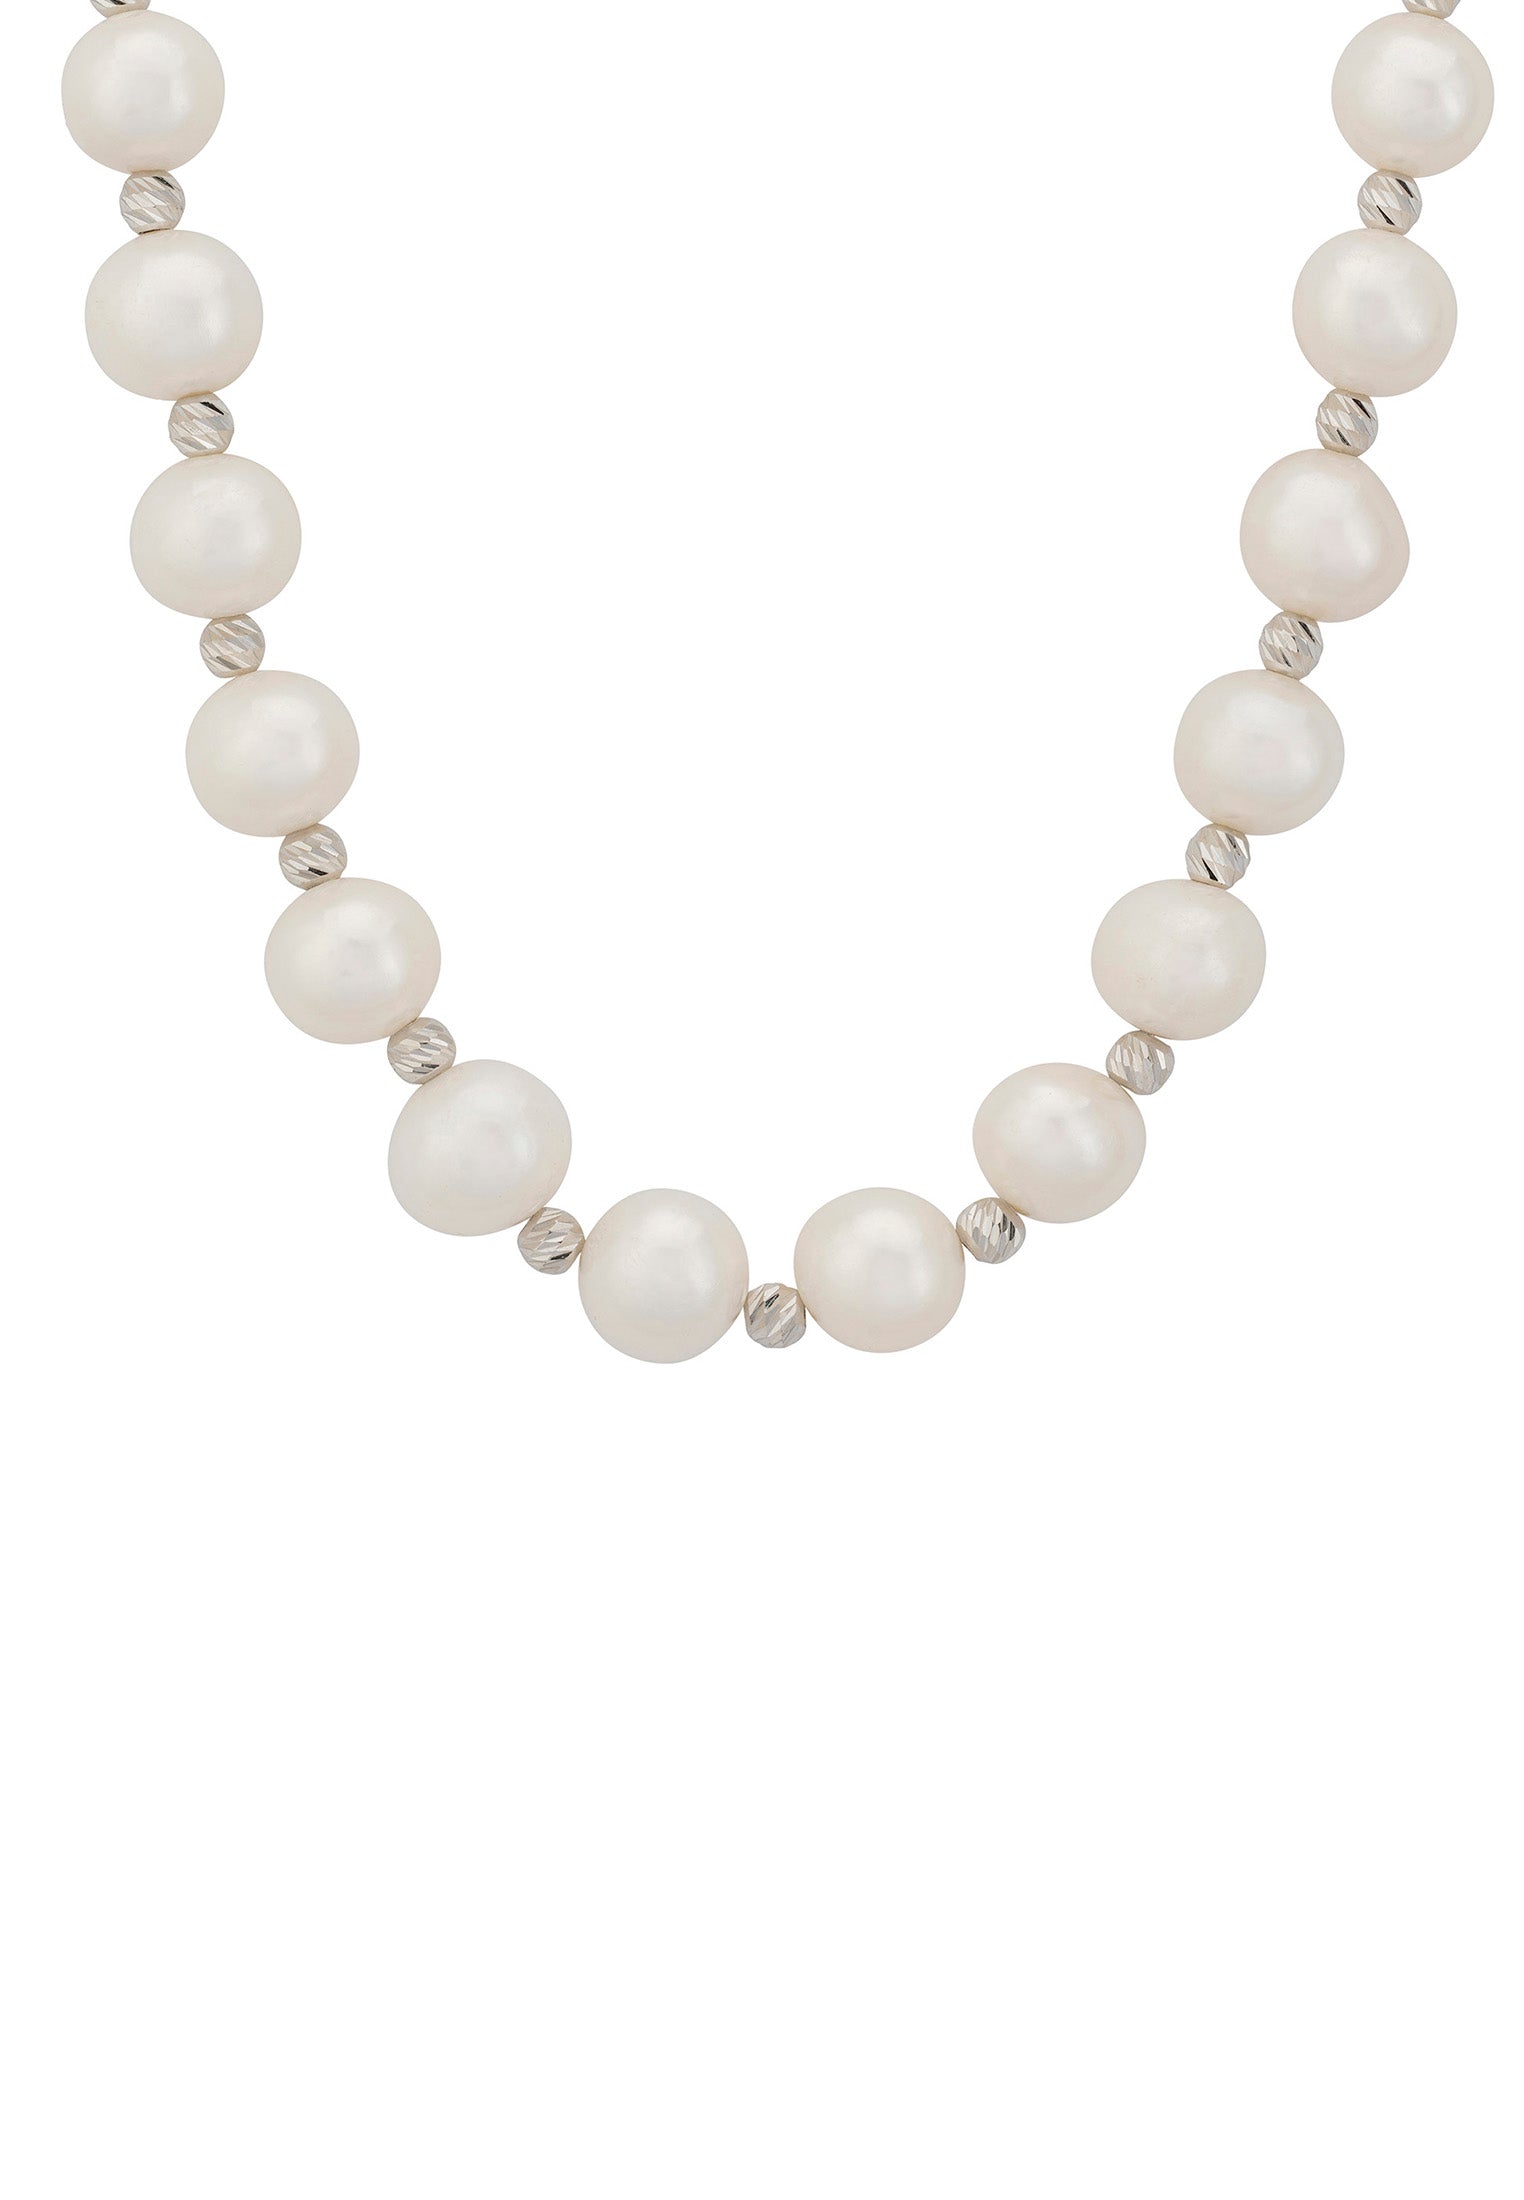 Solid 14K White Gold Classic Natural Pearl Necklace